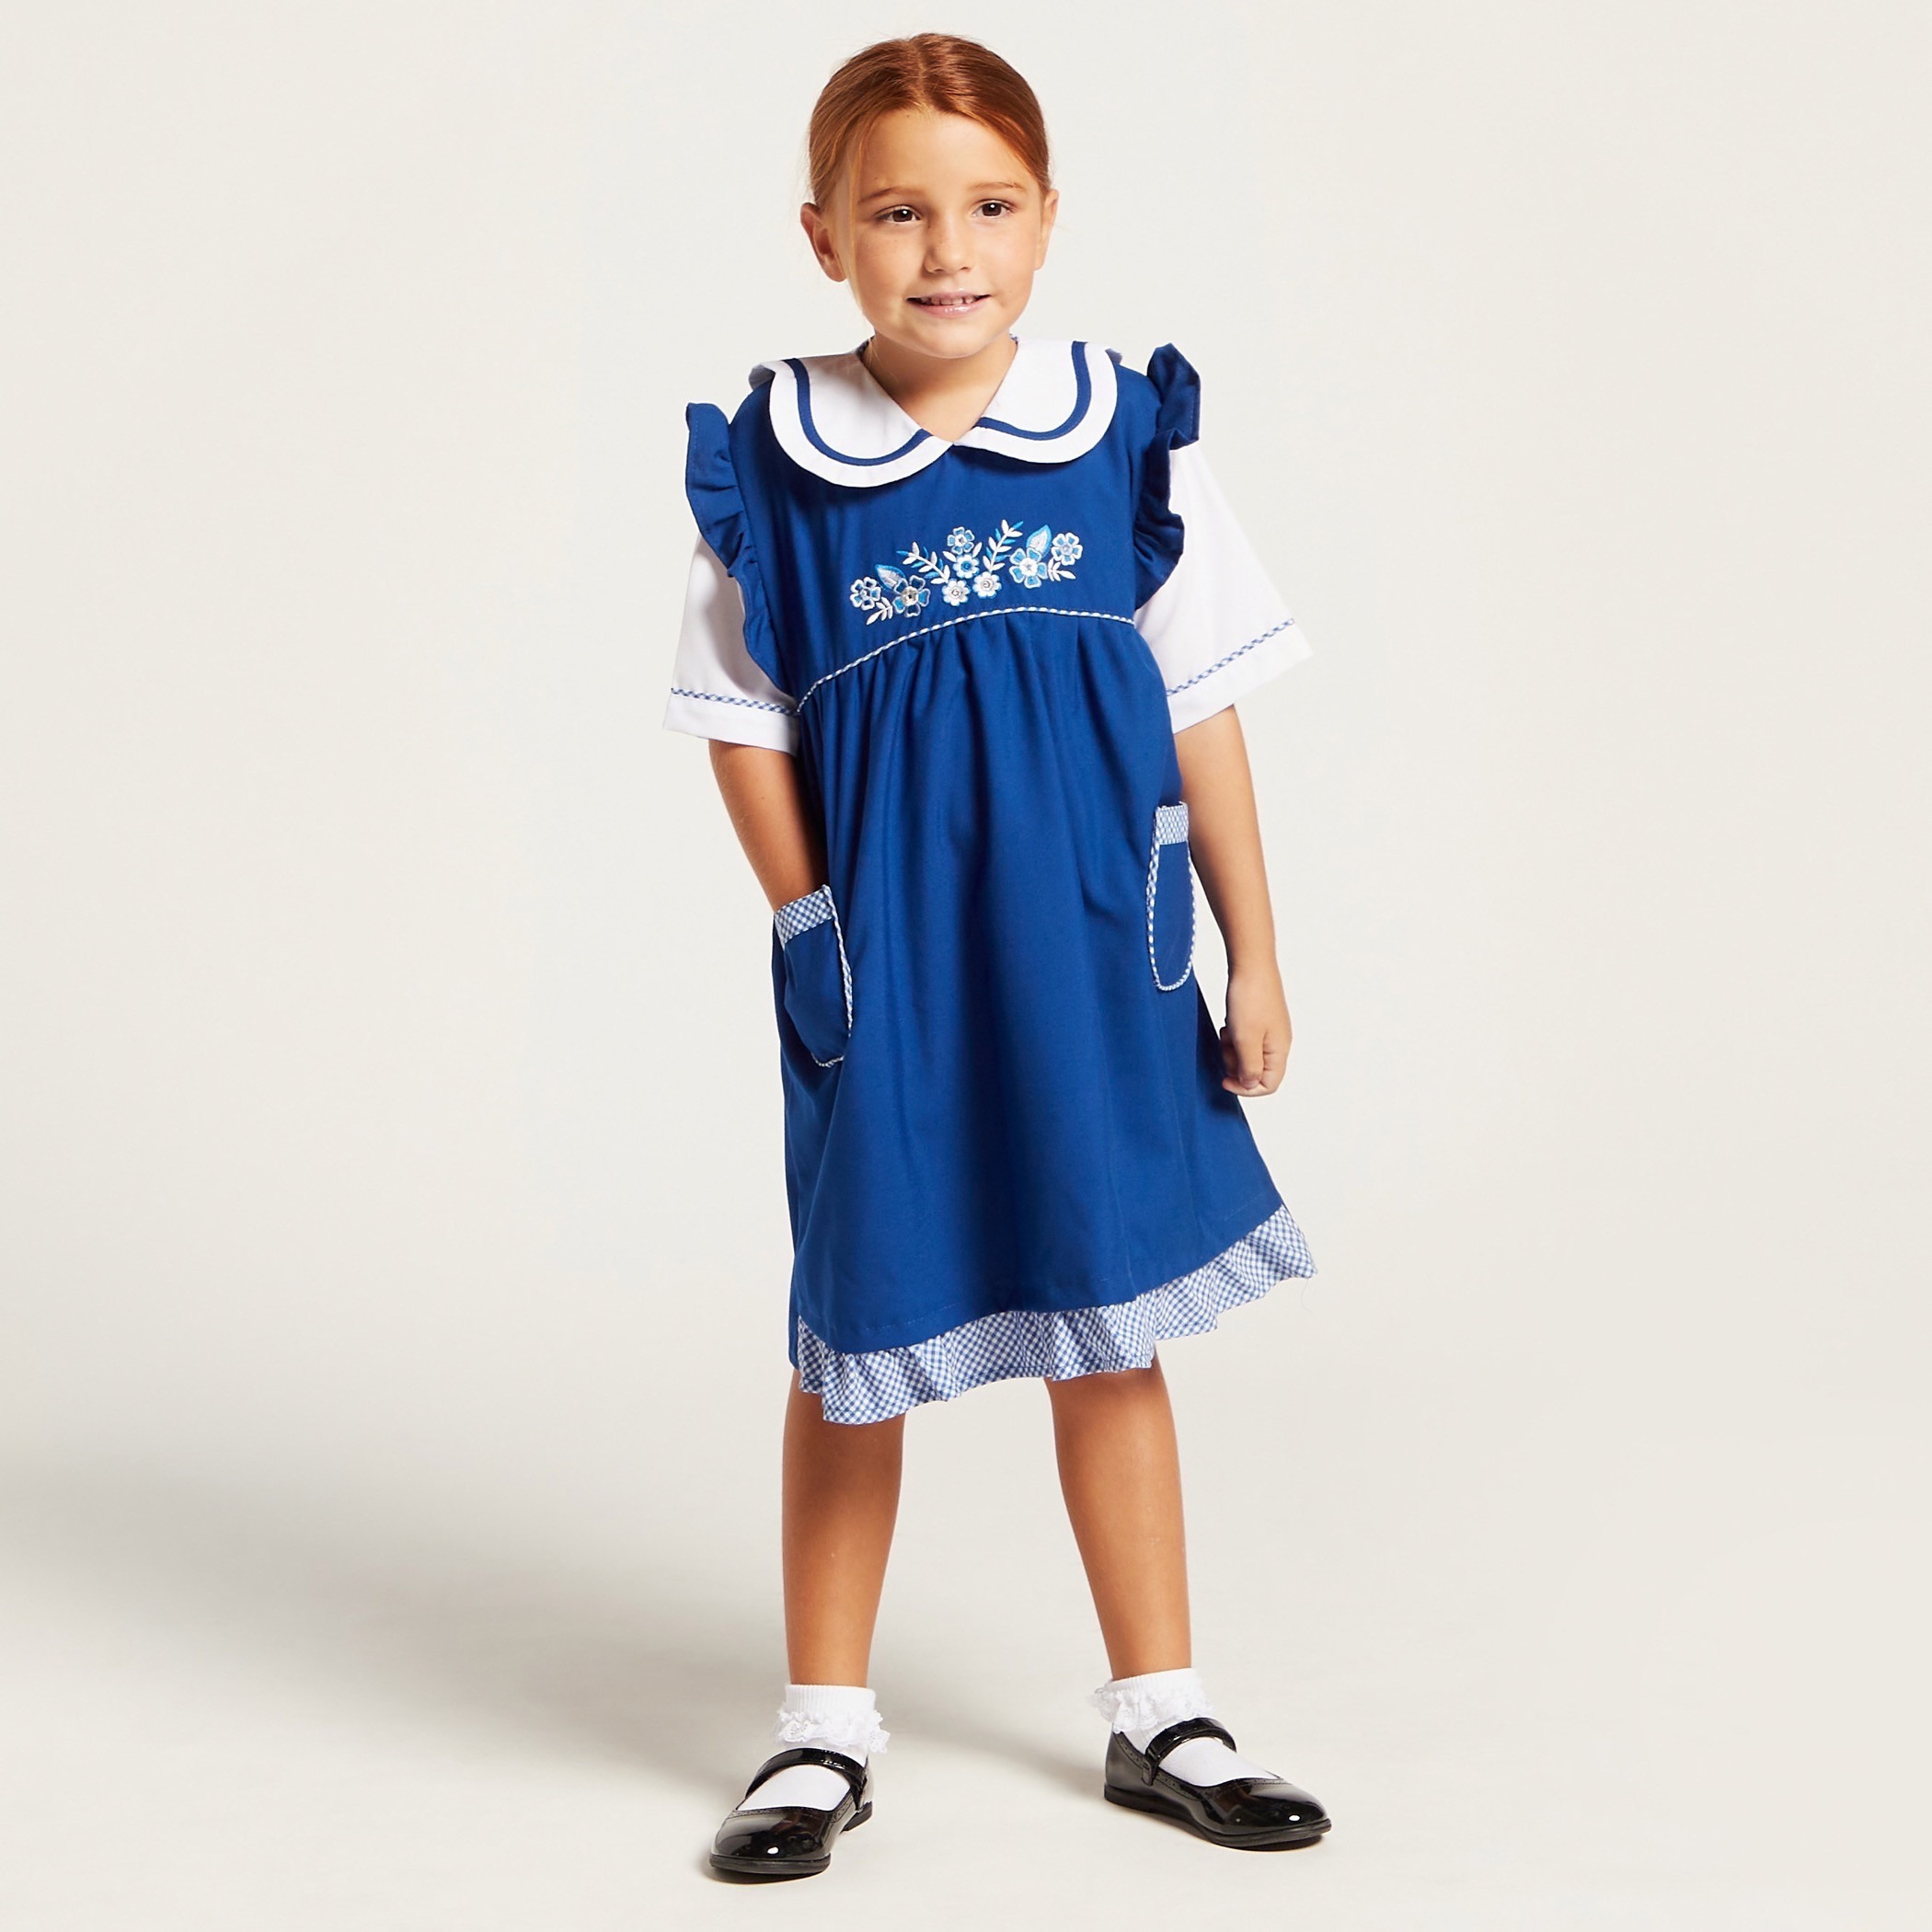 Shop for 17 years | Dresses | Kids | online at Grattan